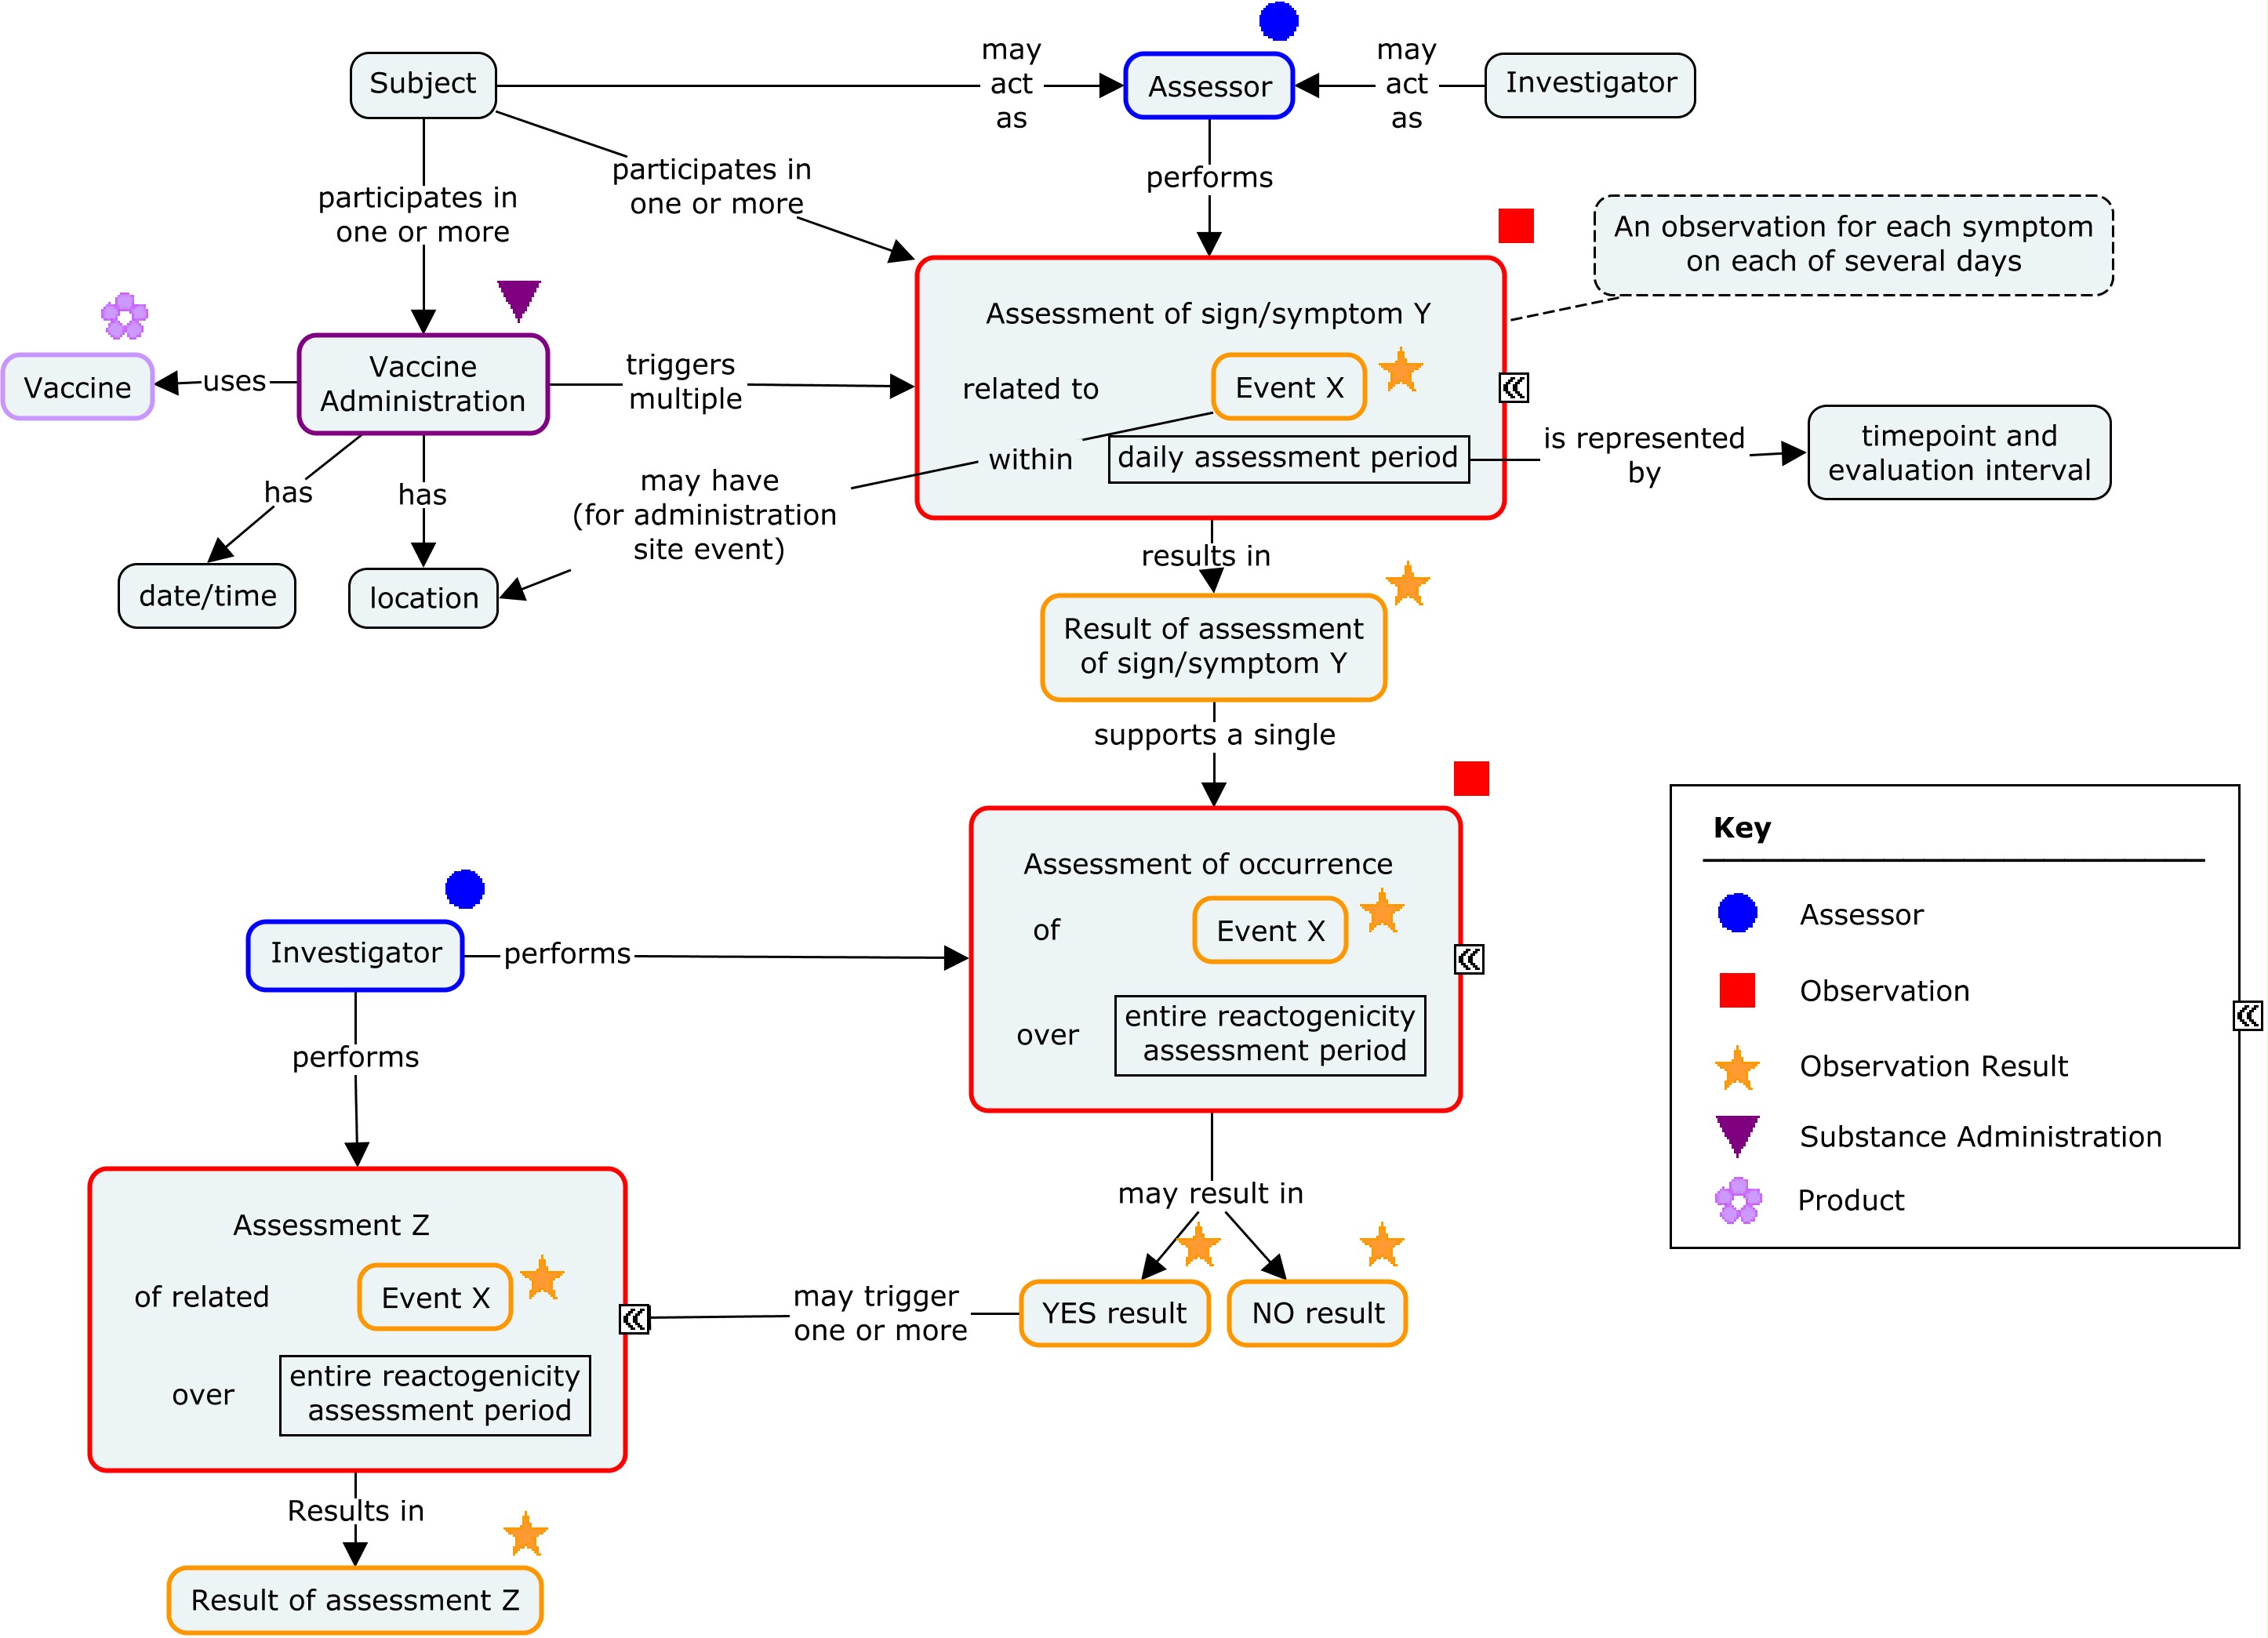 Concept map for reactogenicity